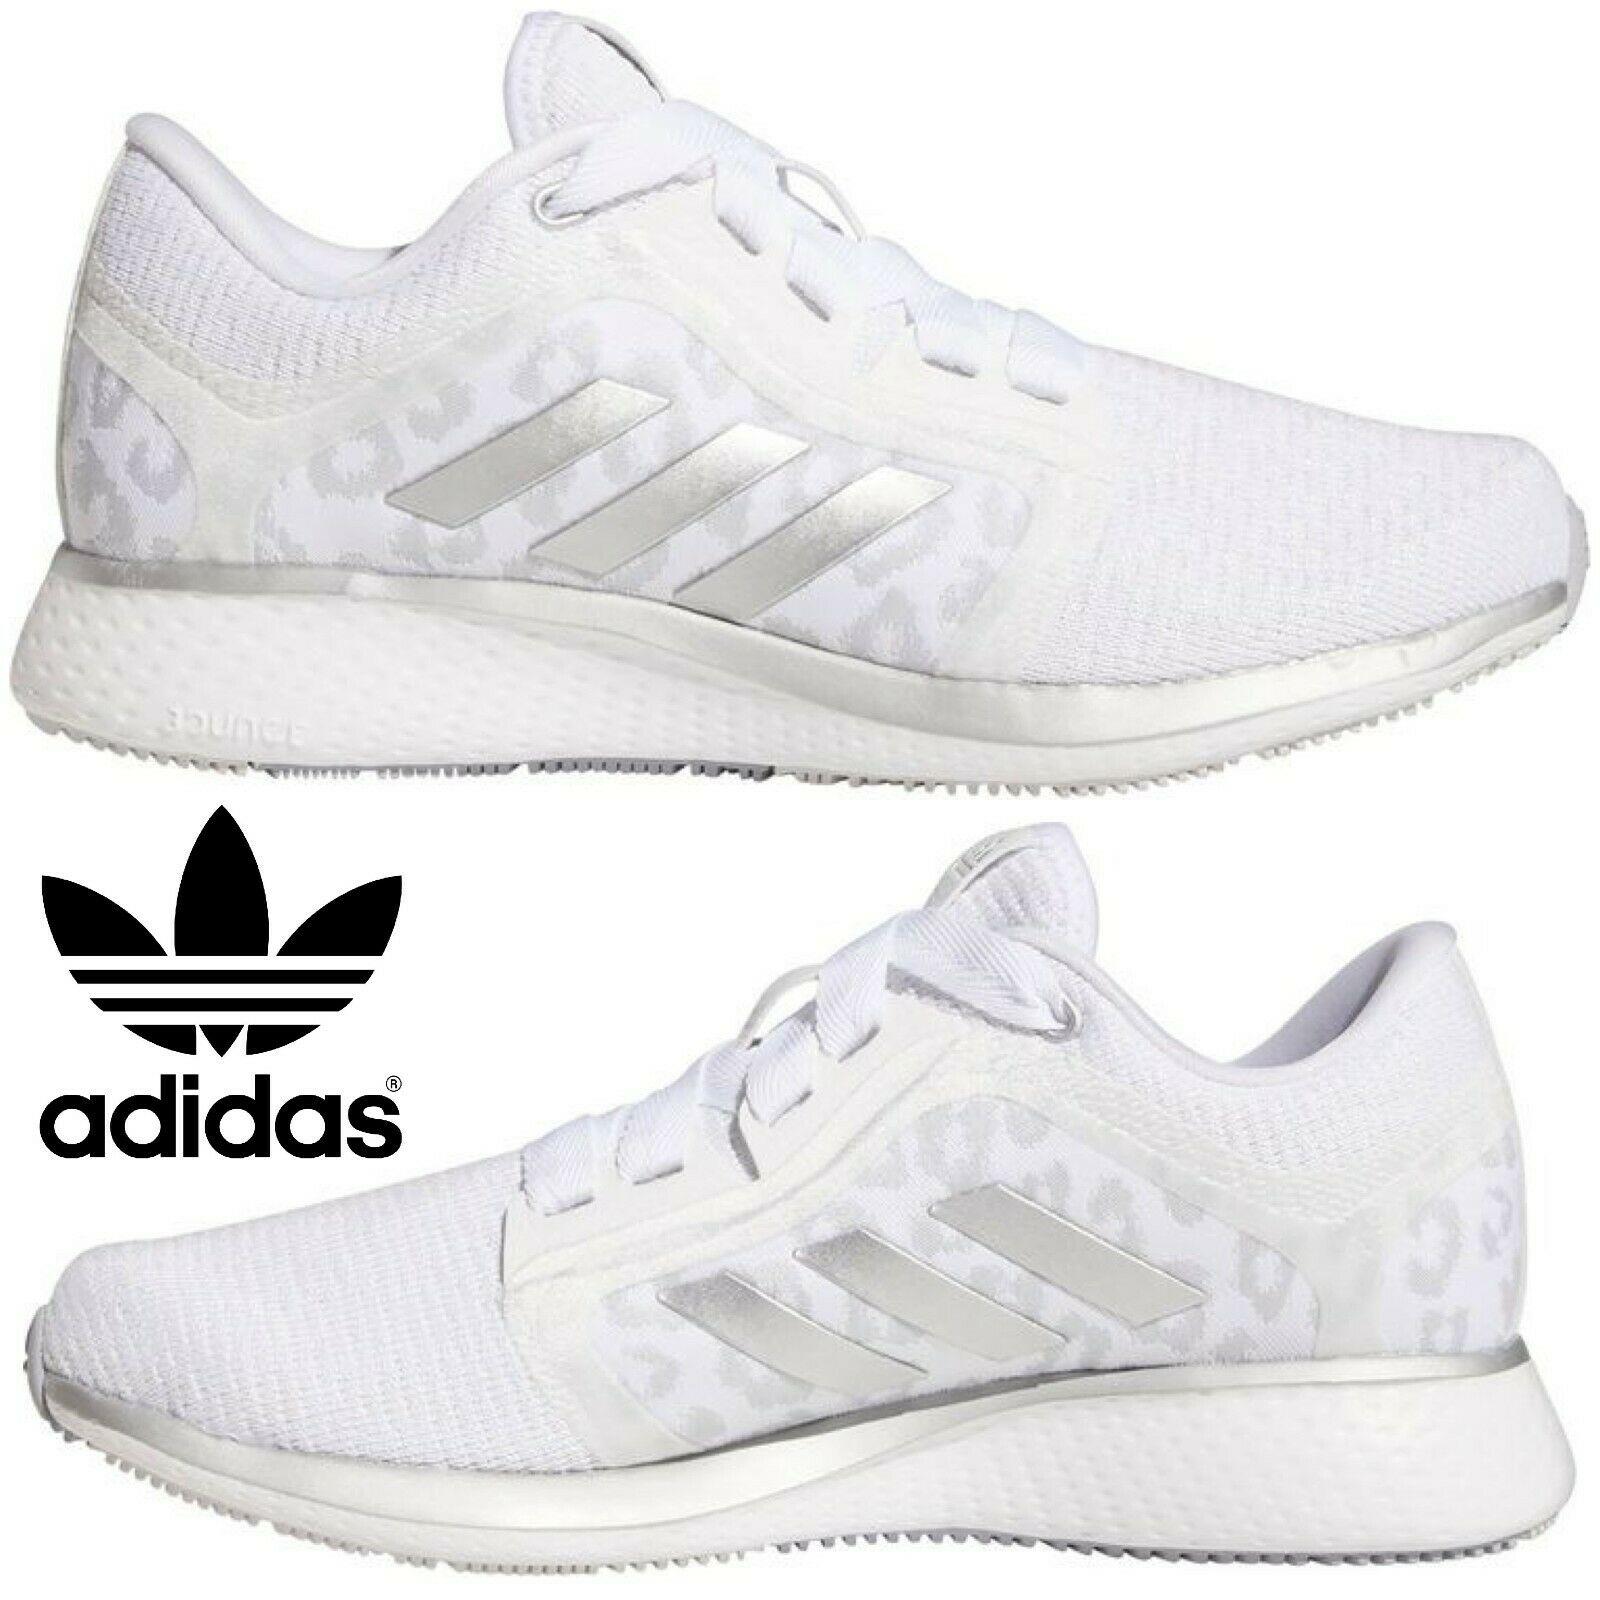 Adidas shoes Edge Lux - White , GREY/WHITE/LEOPARD Manufacturer 3